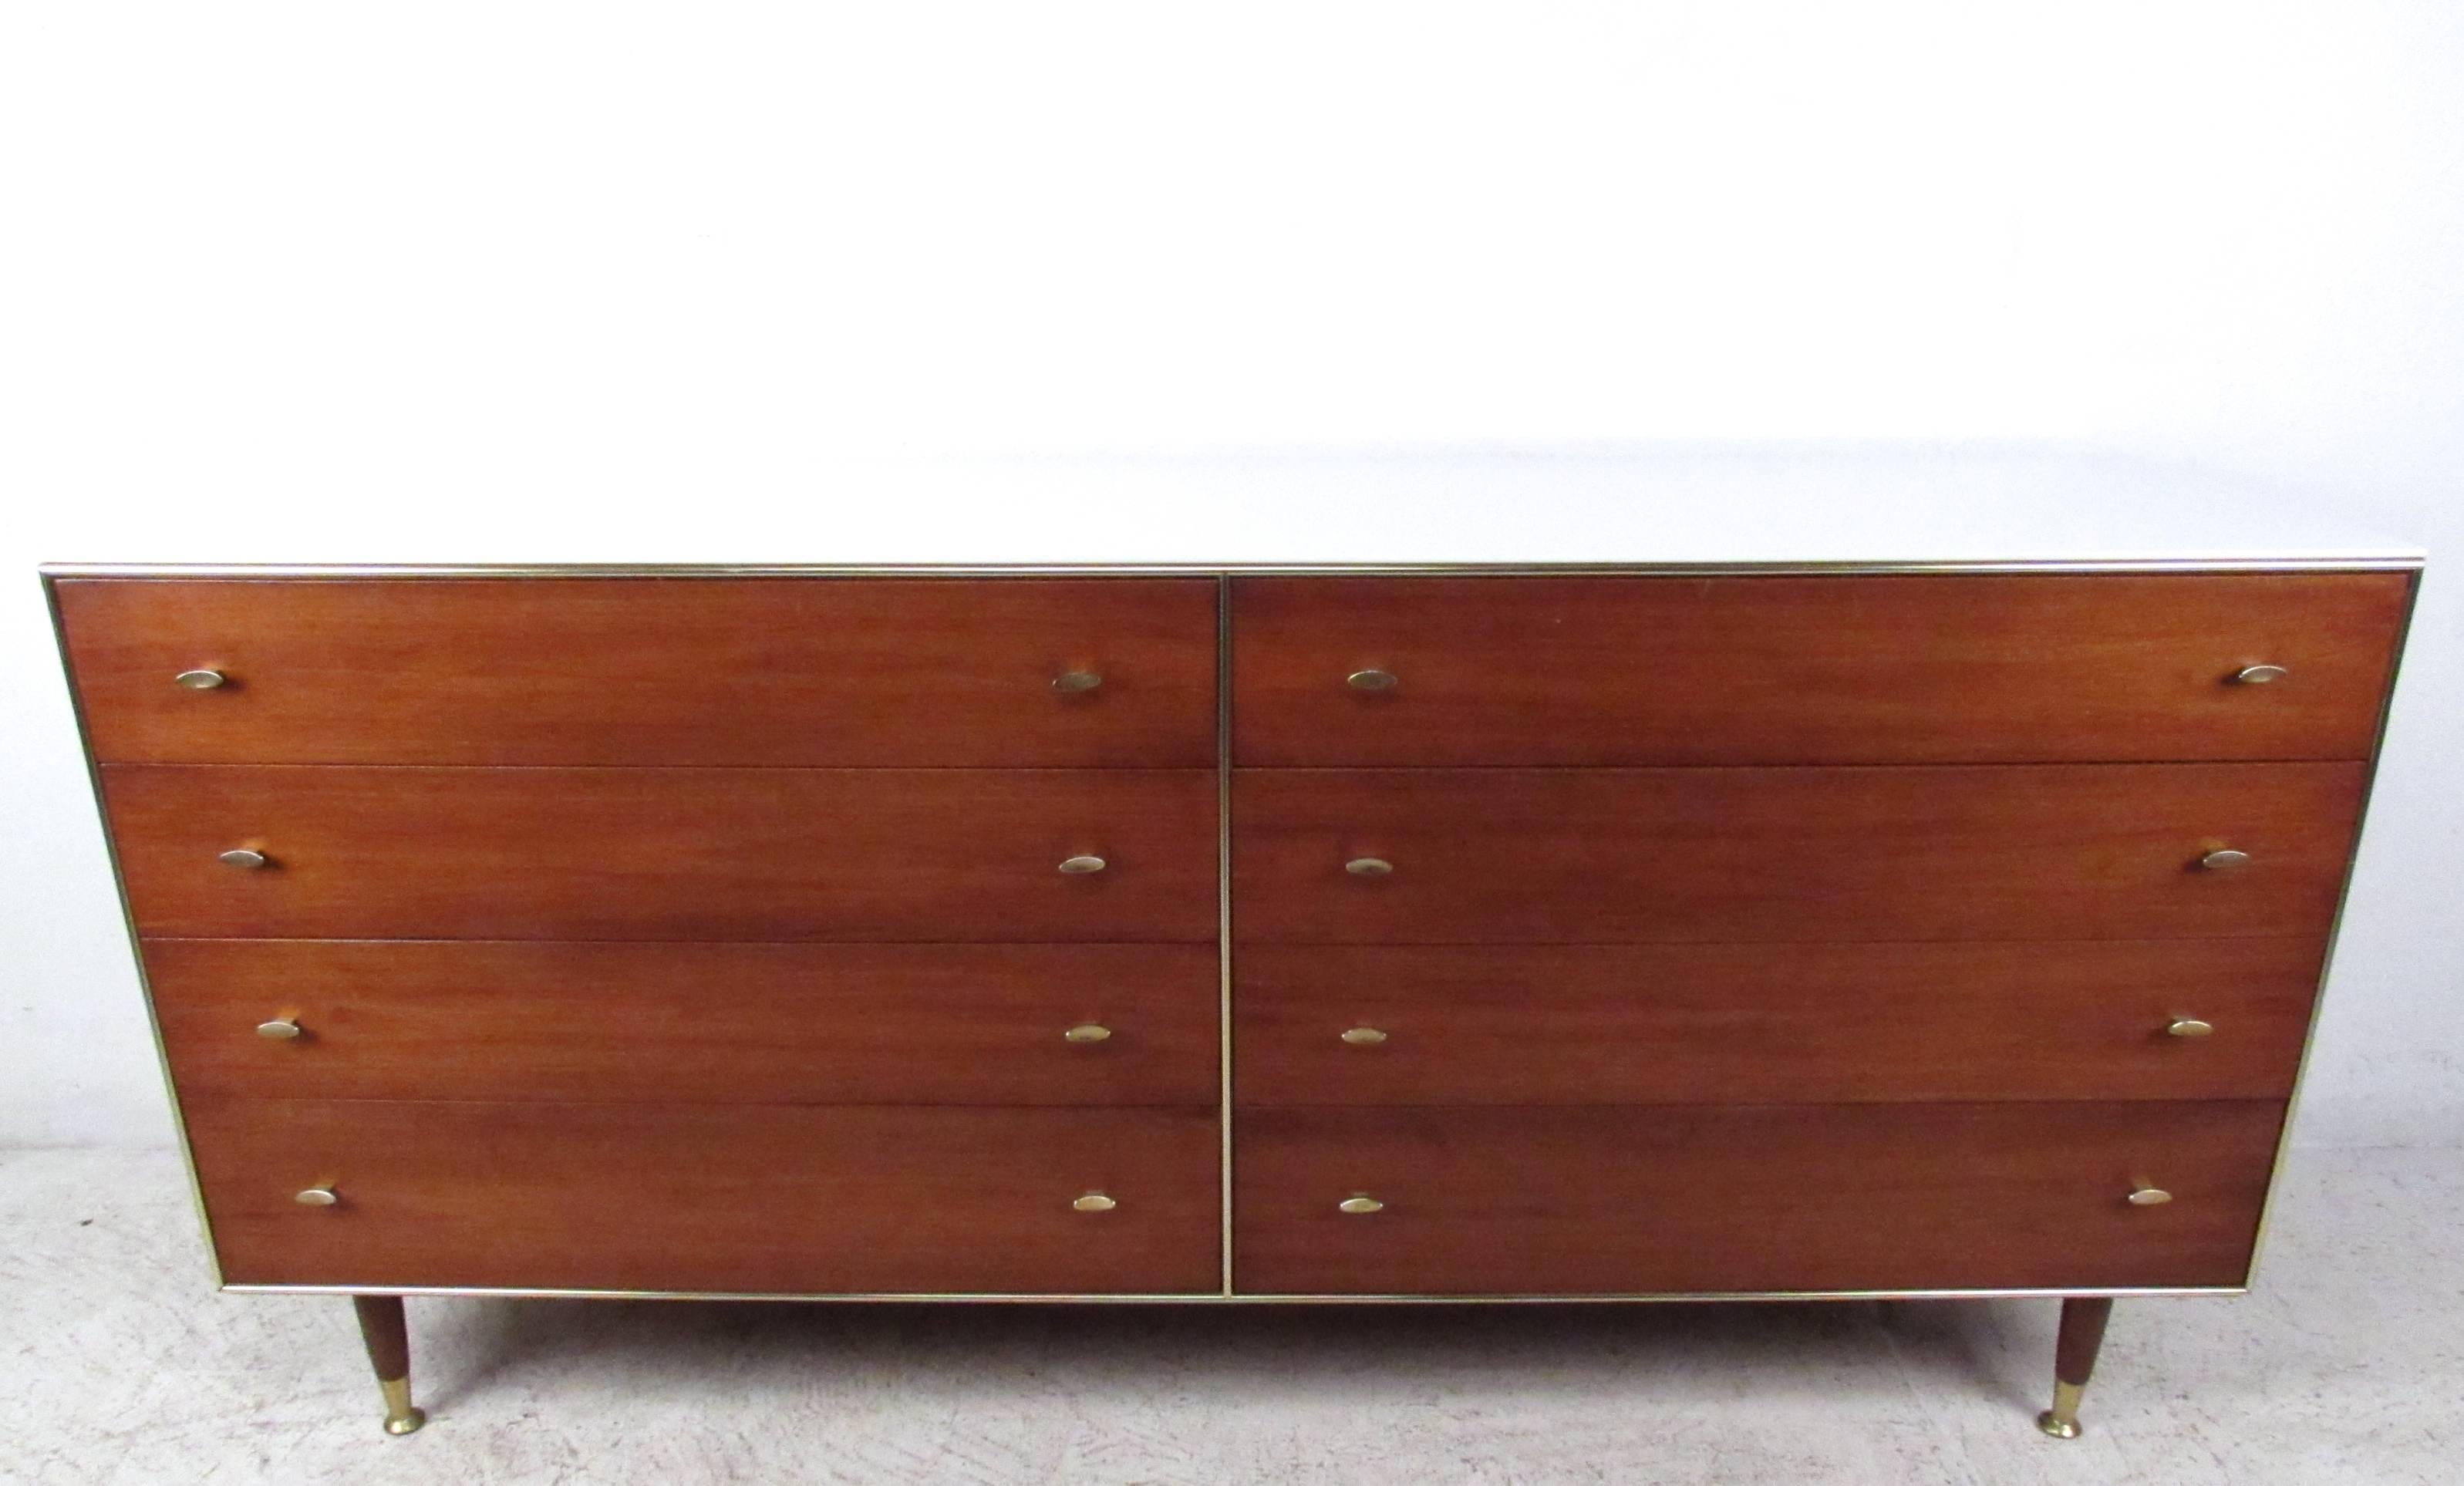 This unique eight-drawer dresser by R-Way of Sheboygan, WI offers plenty of storage in a stylish package. Brass handles, feet, and trim are wonderfully offset by a deep reddish walnut finish. White glass rests on top for added durability and a